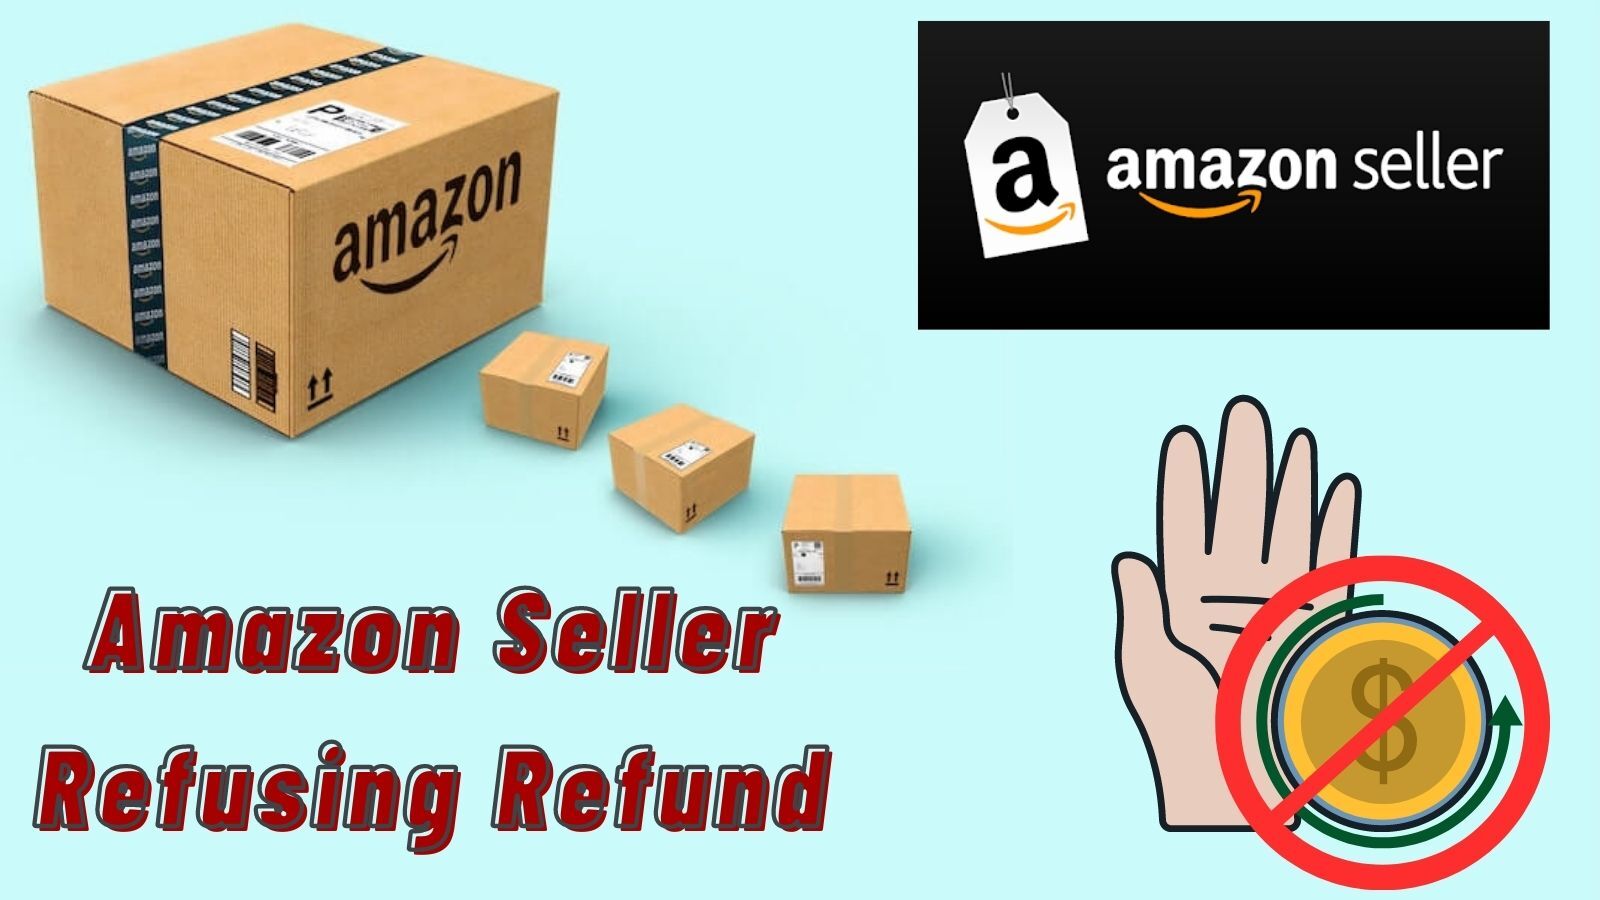 Amazon Seller Refusing Refund (What Should You Do?)